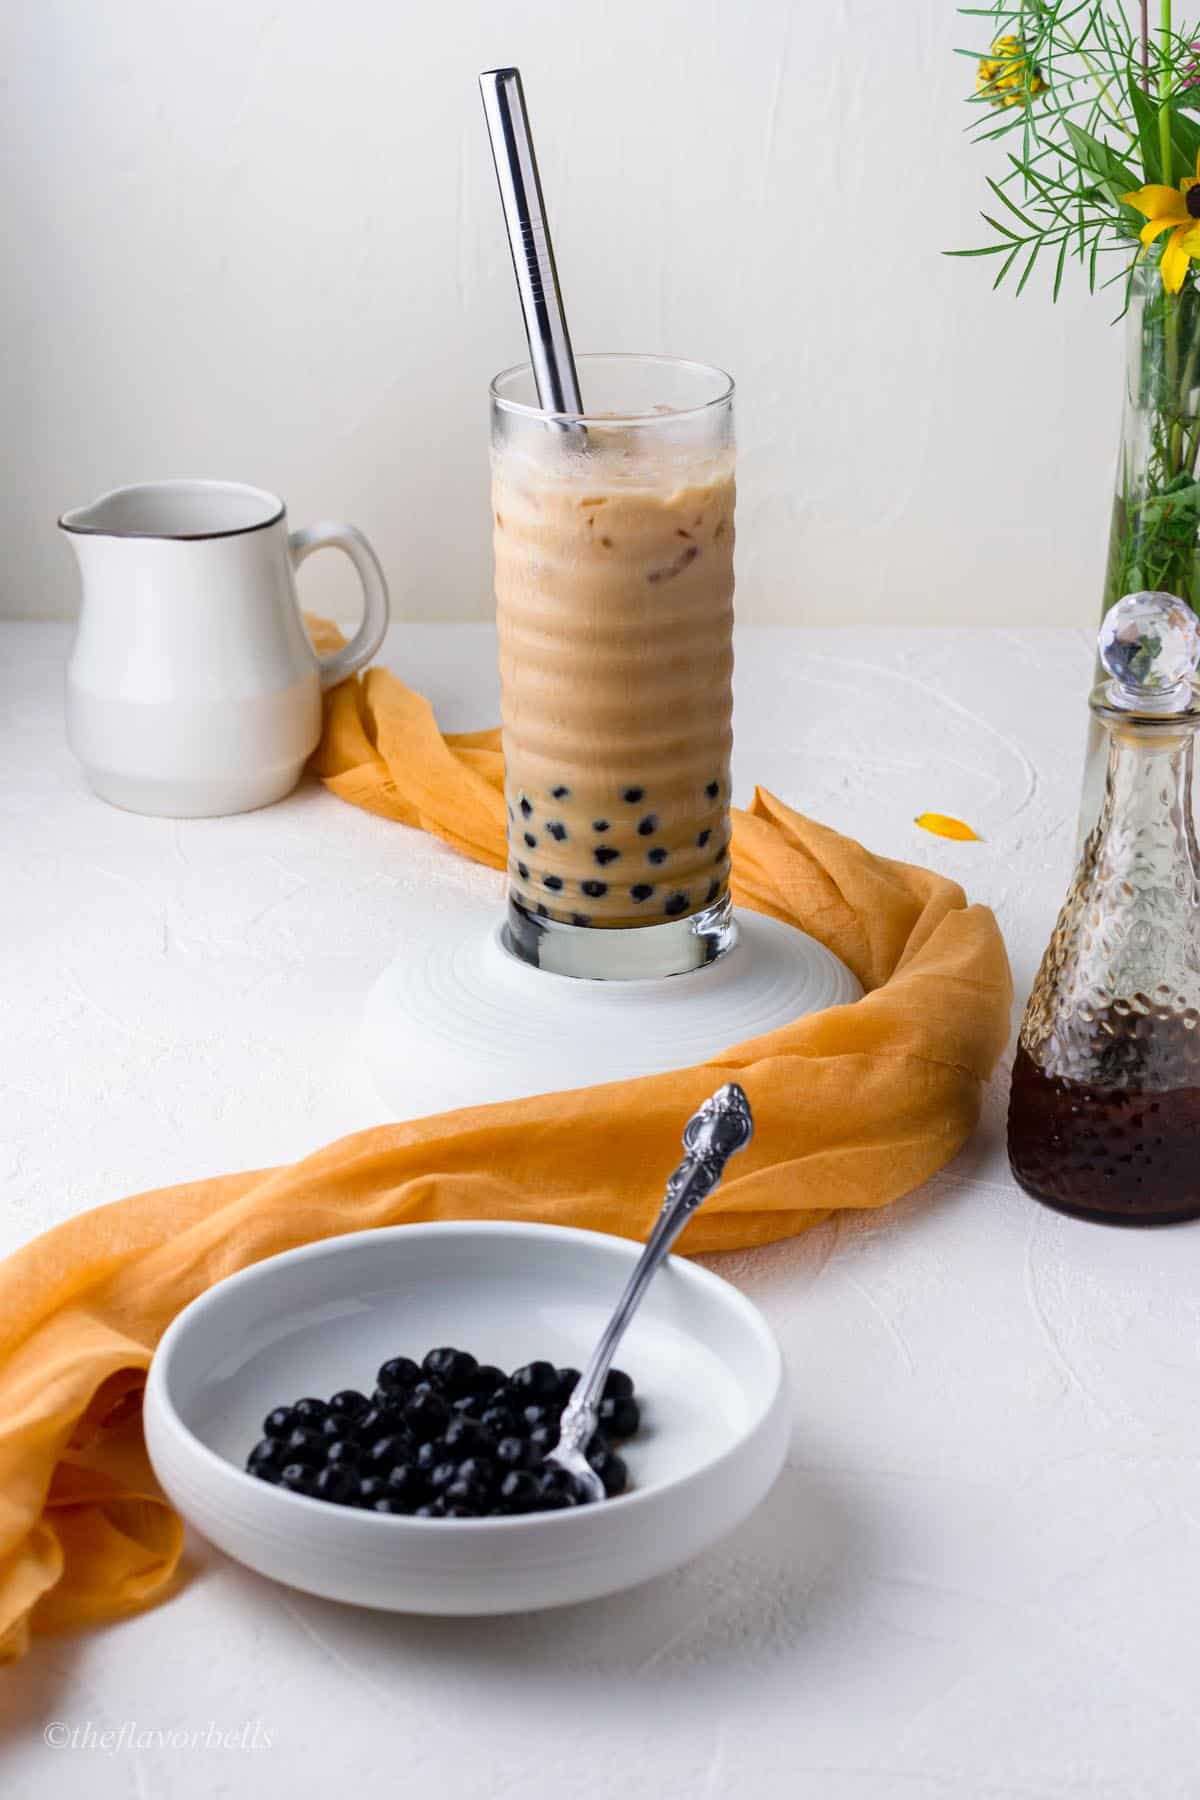 bubble tea made with a bowl of cooked black boba in the foreground and a glass of milk in the background.